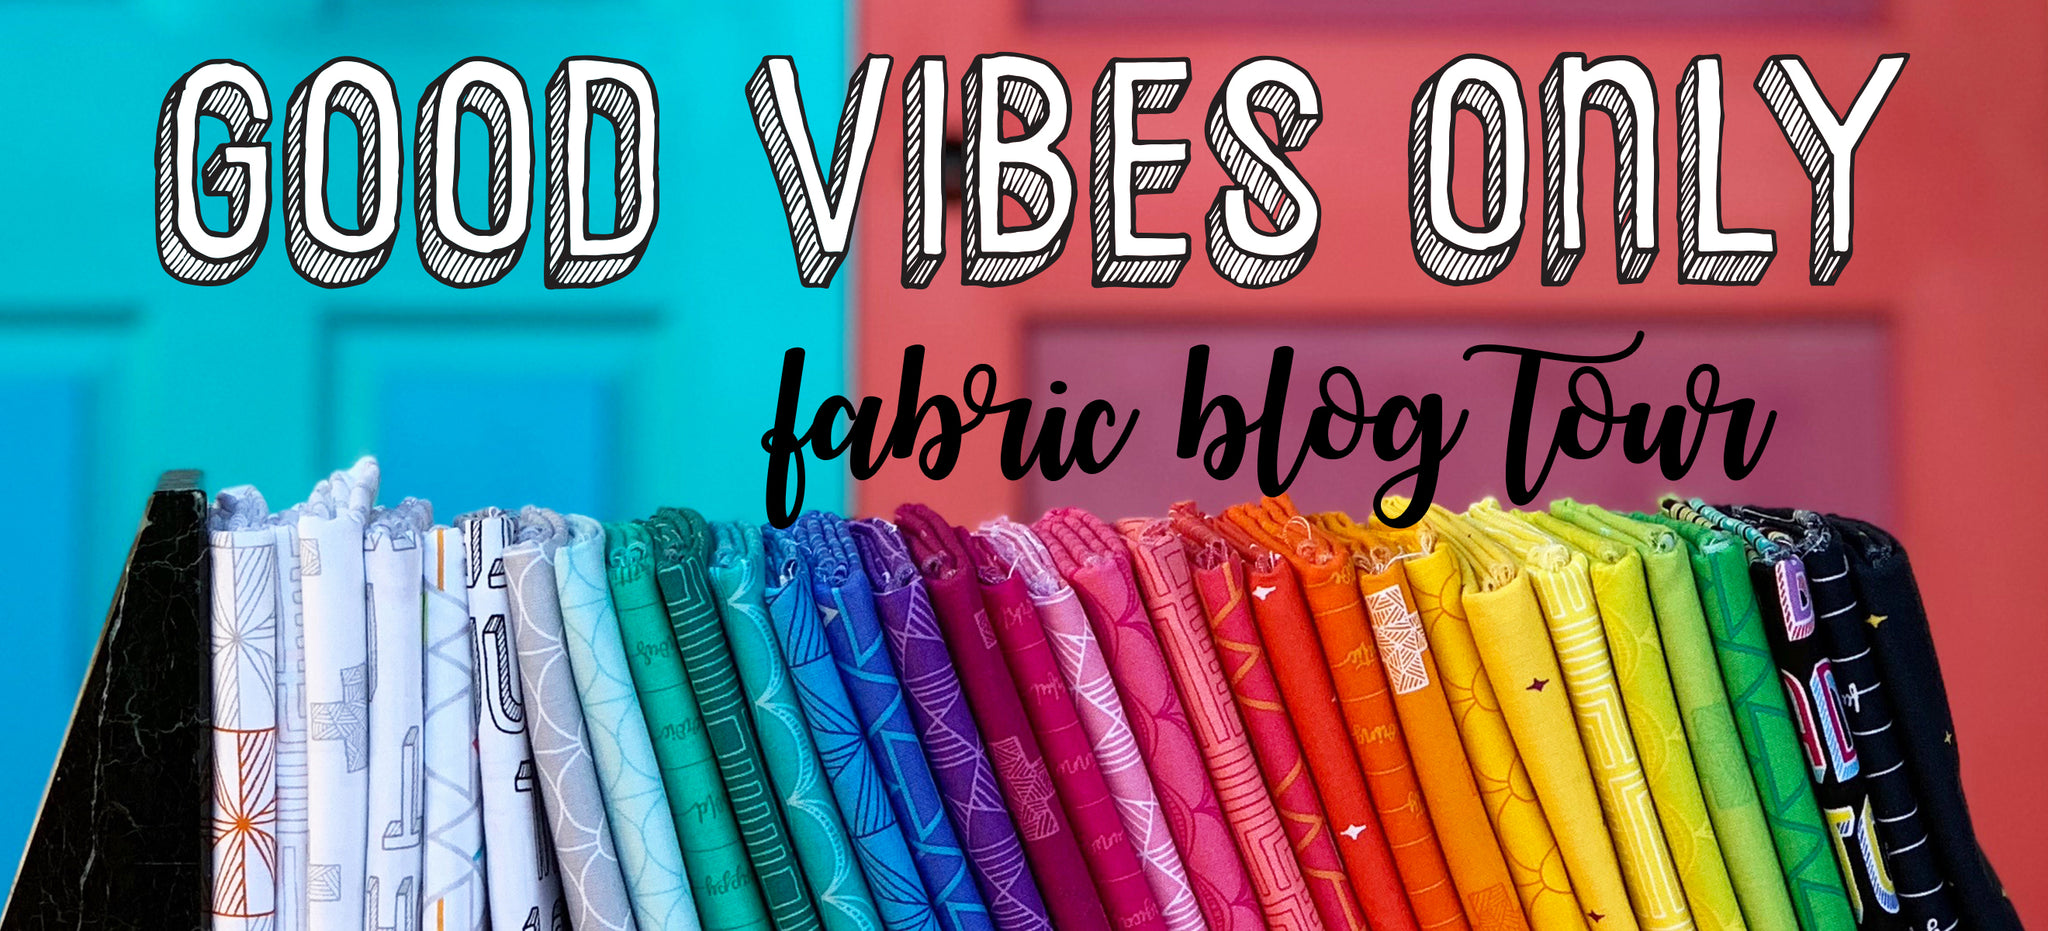 Good Vibes Only Blog Tour